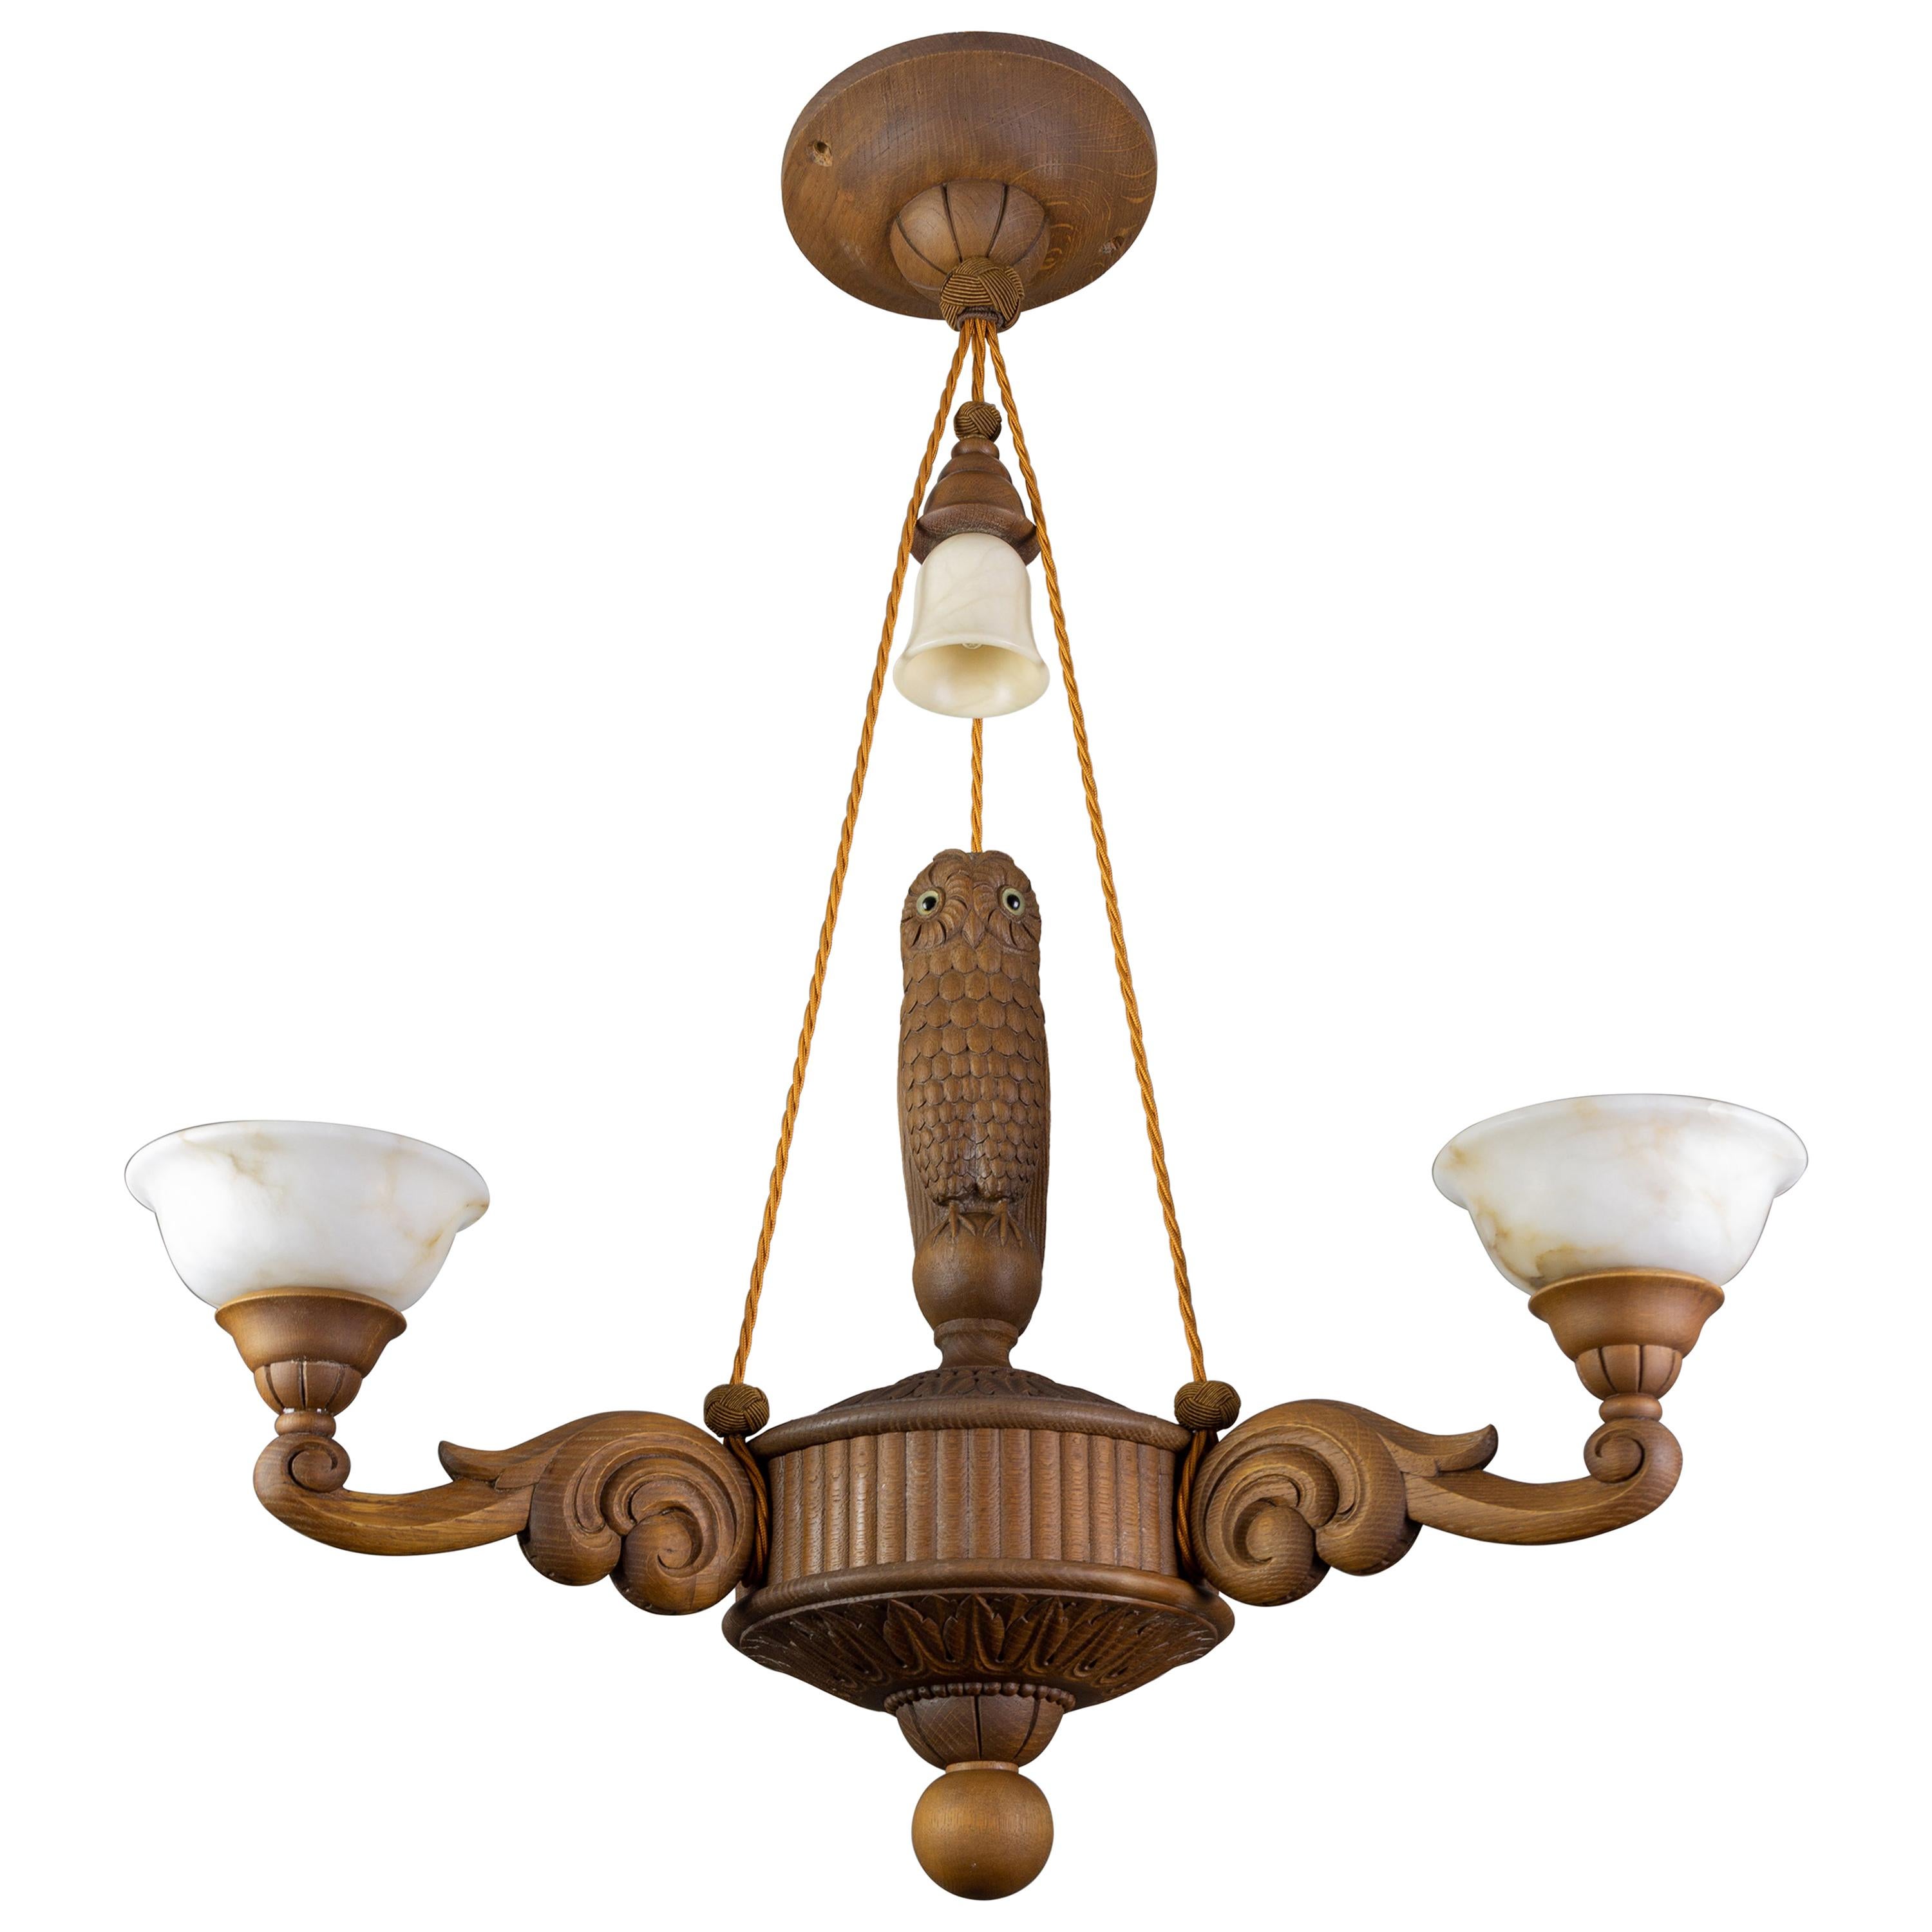 Hand Carved Wooden and Alabaster Four-Light Chandelier with Owl Figure, Germany